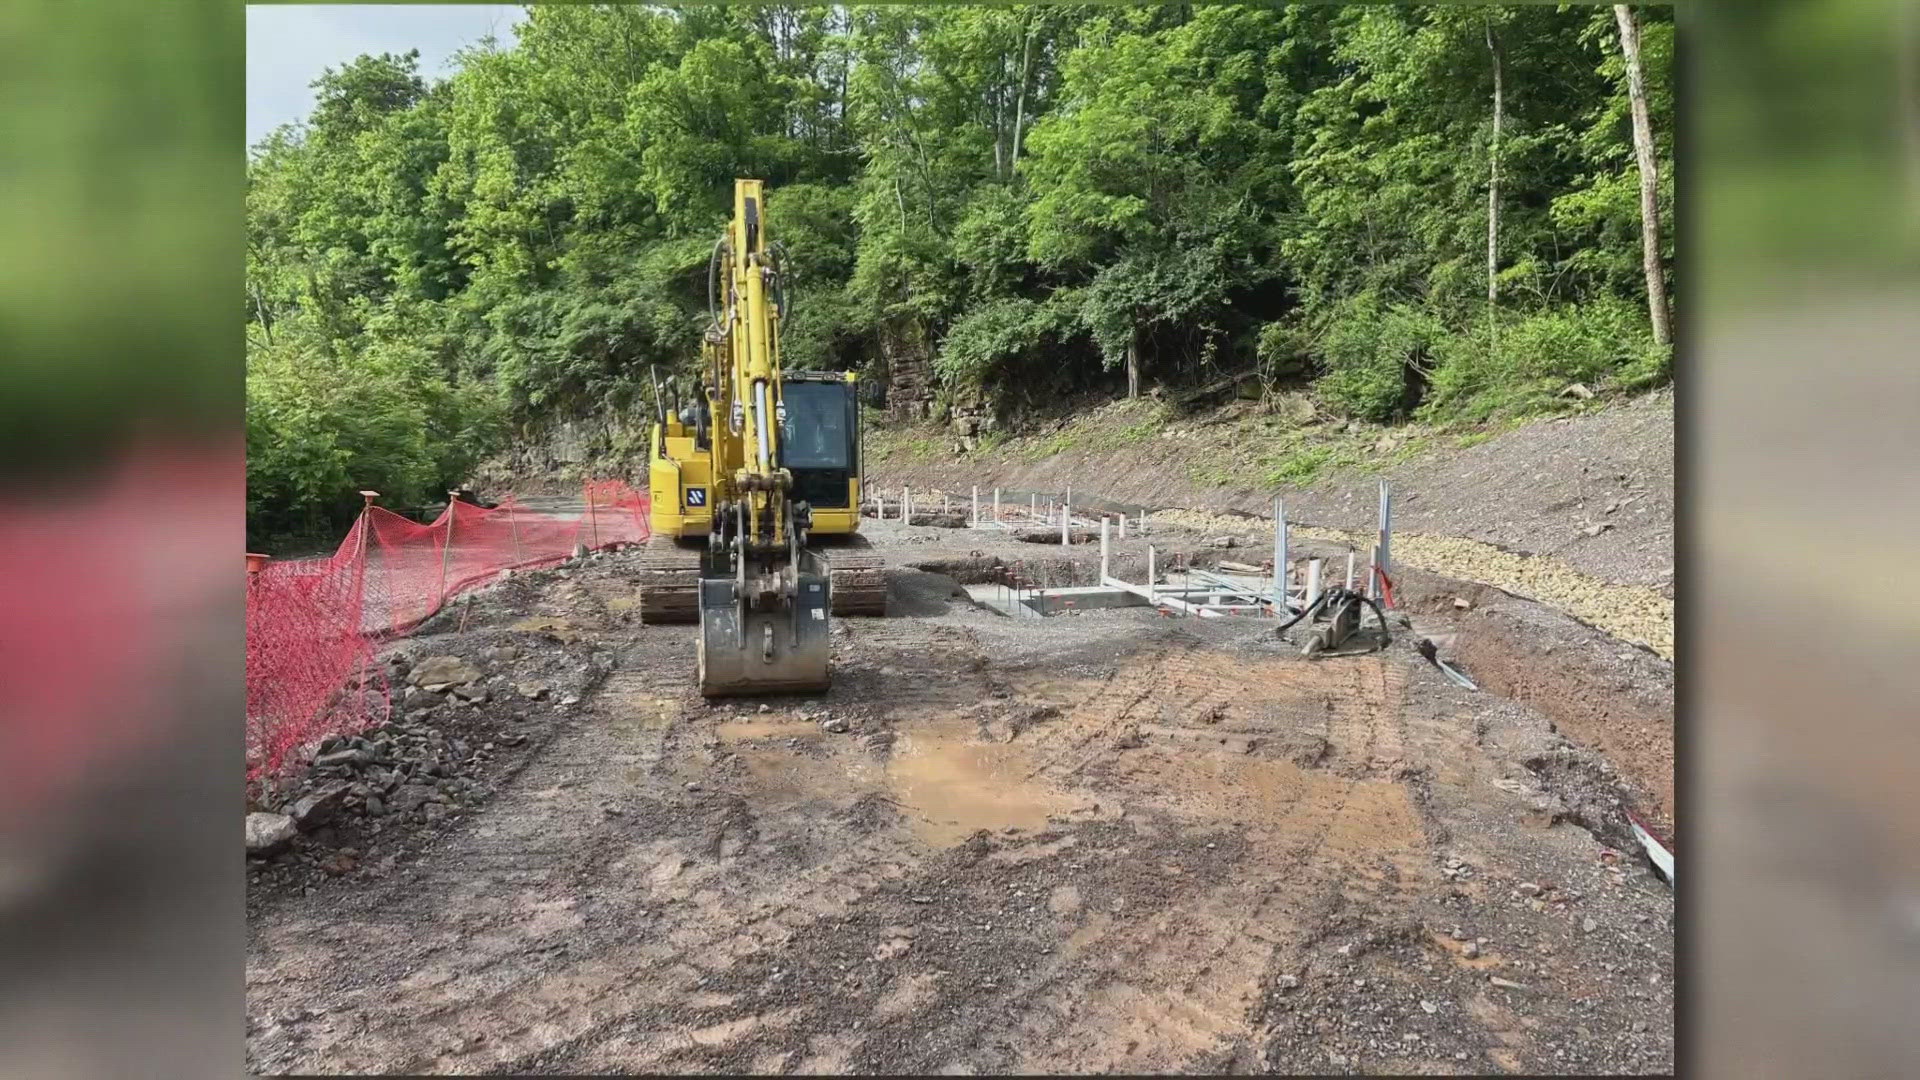 With a new entrance and accessibility improvements in Phase I, investment in Augusta Quarry upgrades totals almost $5.4 million, according to the city.